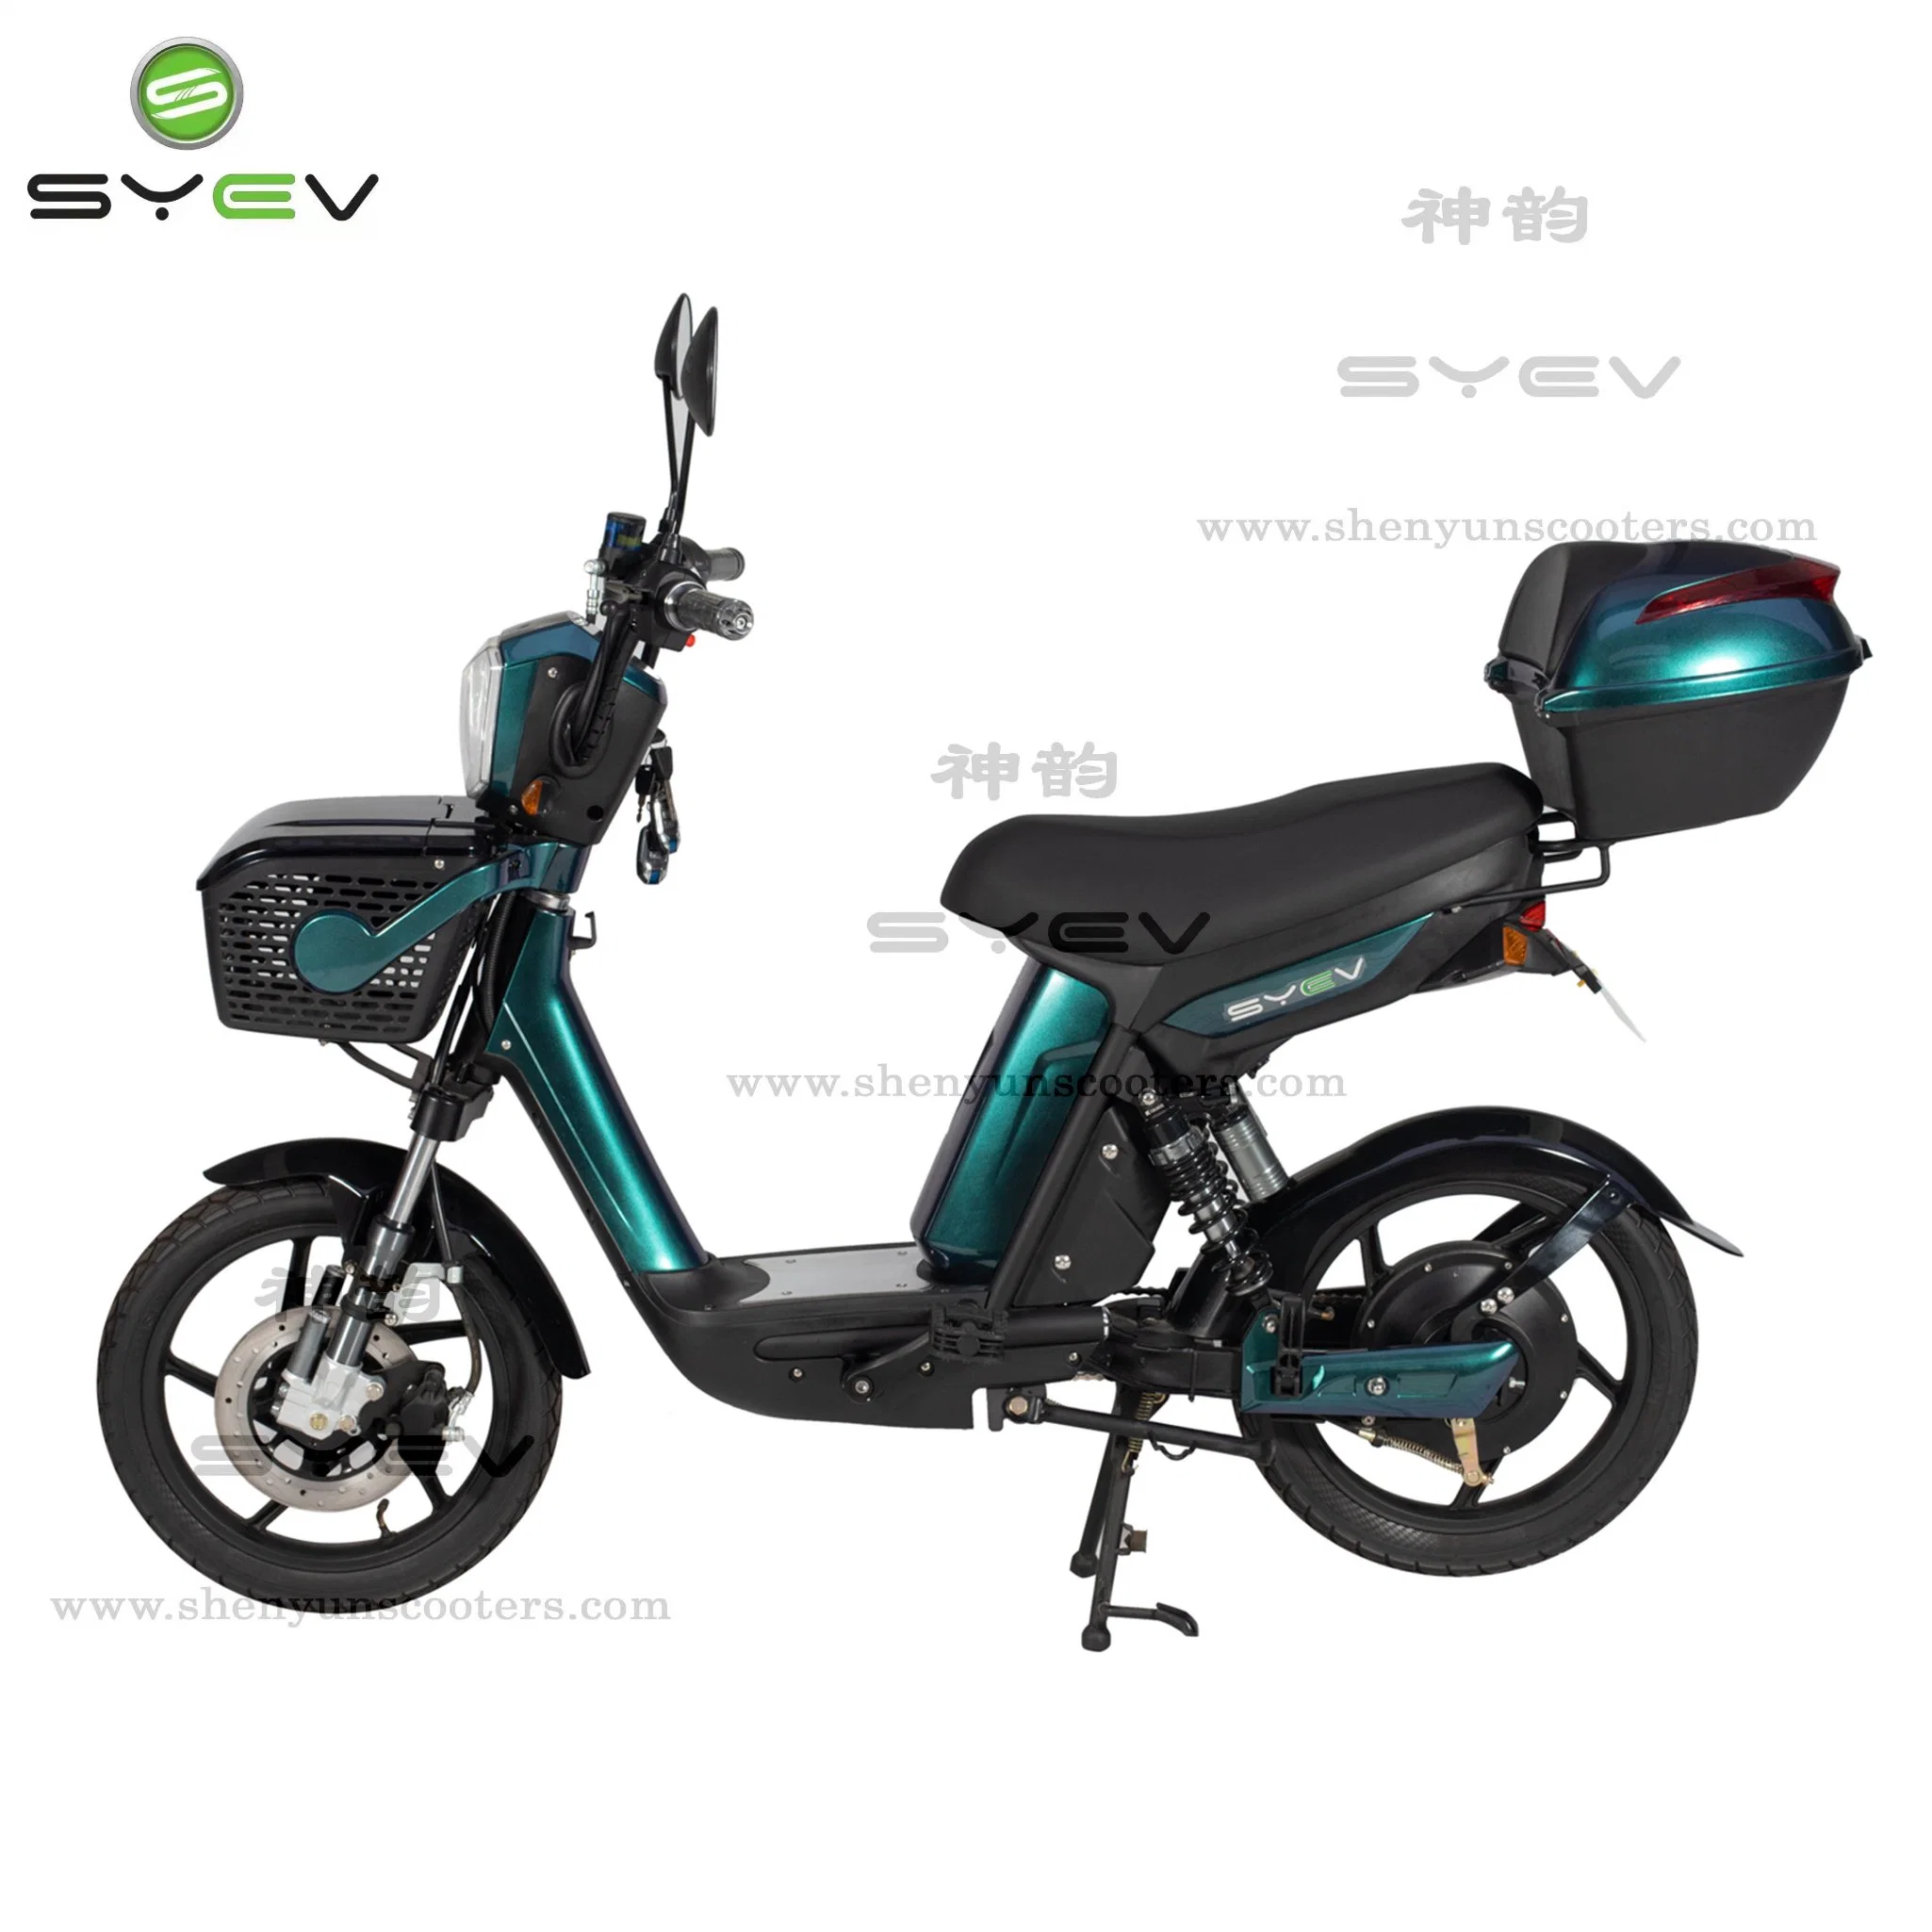 Wuxi Elcrtric Factory Syev 48V 20ah Steel Fram Brushless Motor Mountain Electric Bike Mobility Scooter with EEC